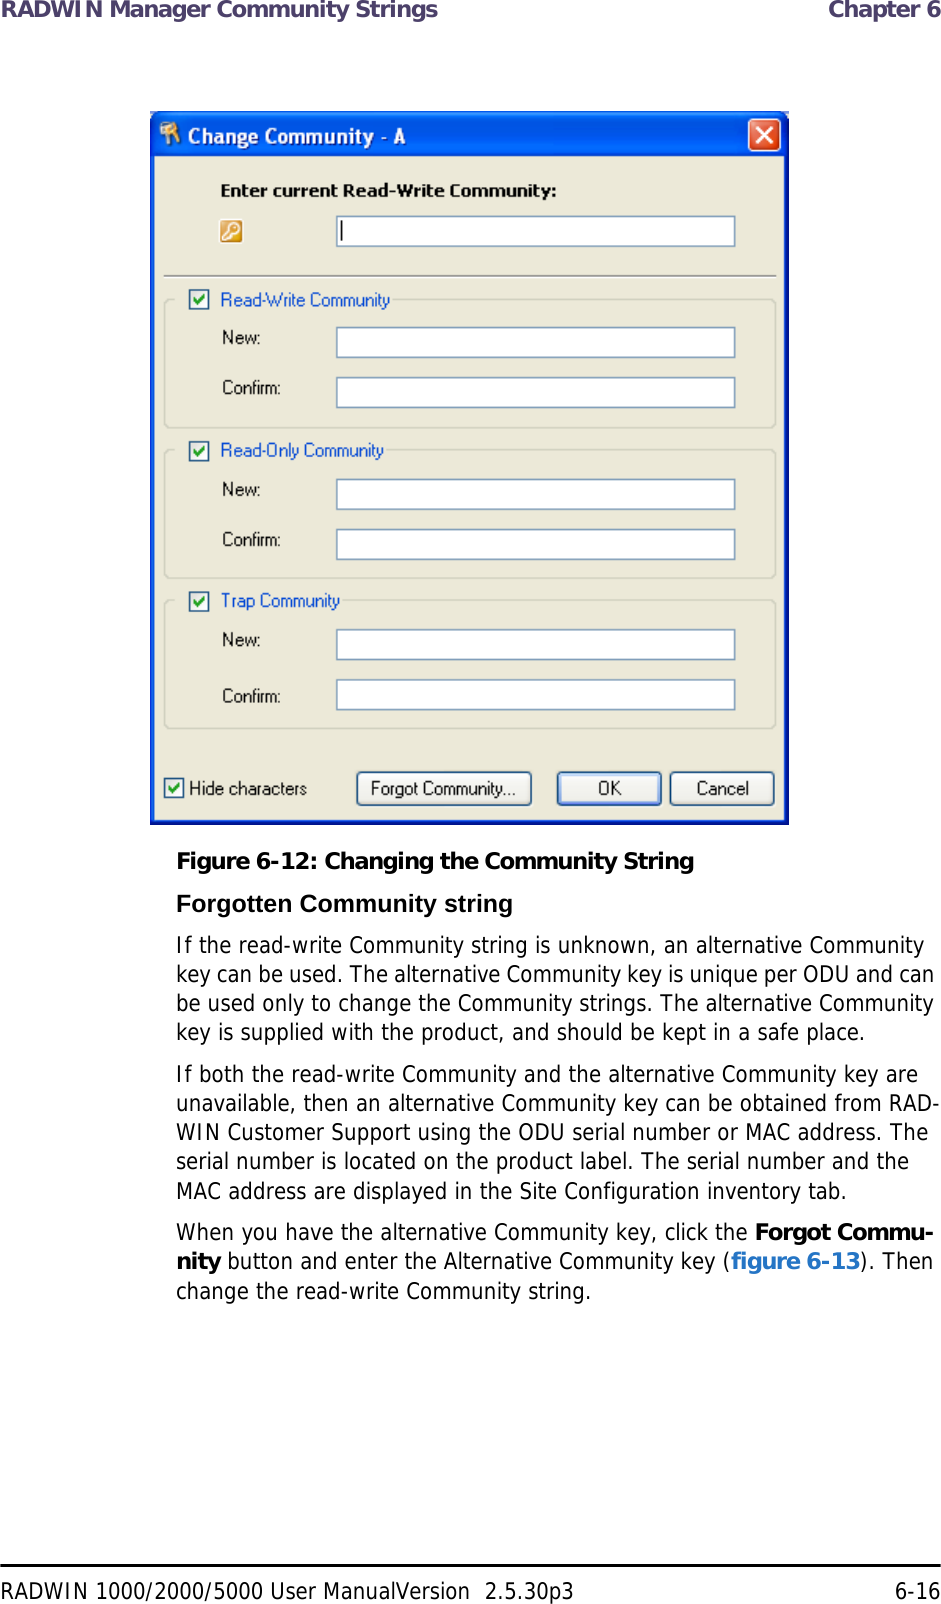 RADWIN Manager Community Strings  Chapter 6RADWIN 1000/2000/5000 User ManualVersion  2.5.30p3 6-16Figure 6-12: Changing the Community StringForgotten Community stringIf the read-write Community string is unknown, an alternative Community key can be used. The alternative Community key is unique per ODU and can be used only to change the Community strings. The alternative Community key is supplied with the product, and should be kept in a safe place. If both the read-write Community and the alternative Community key are unavailable, then an alternative Community key can be obtained from RAD-WIN Customer Support using the ODU serial number or MAC address. The serial number is located on the product label. The serial number and the MAC address are displayed in the Site Configuration inventory tab.When you have the alternative Community key, click the Forgot Commu-nity button and enter the Alternative Community key (figure 6-13). Then change the read-write Community string.